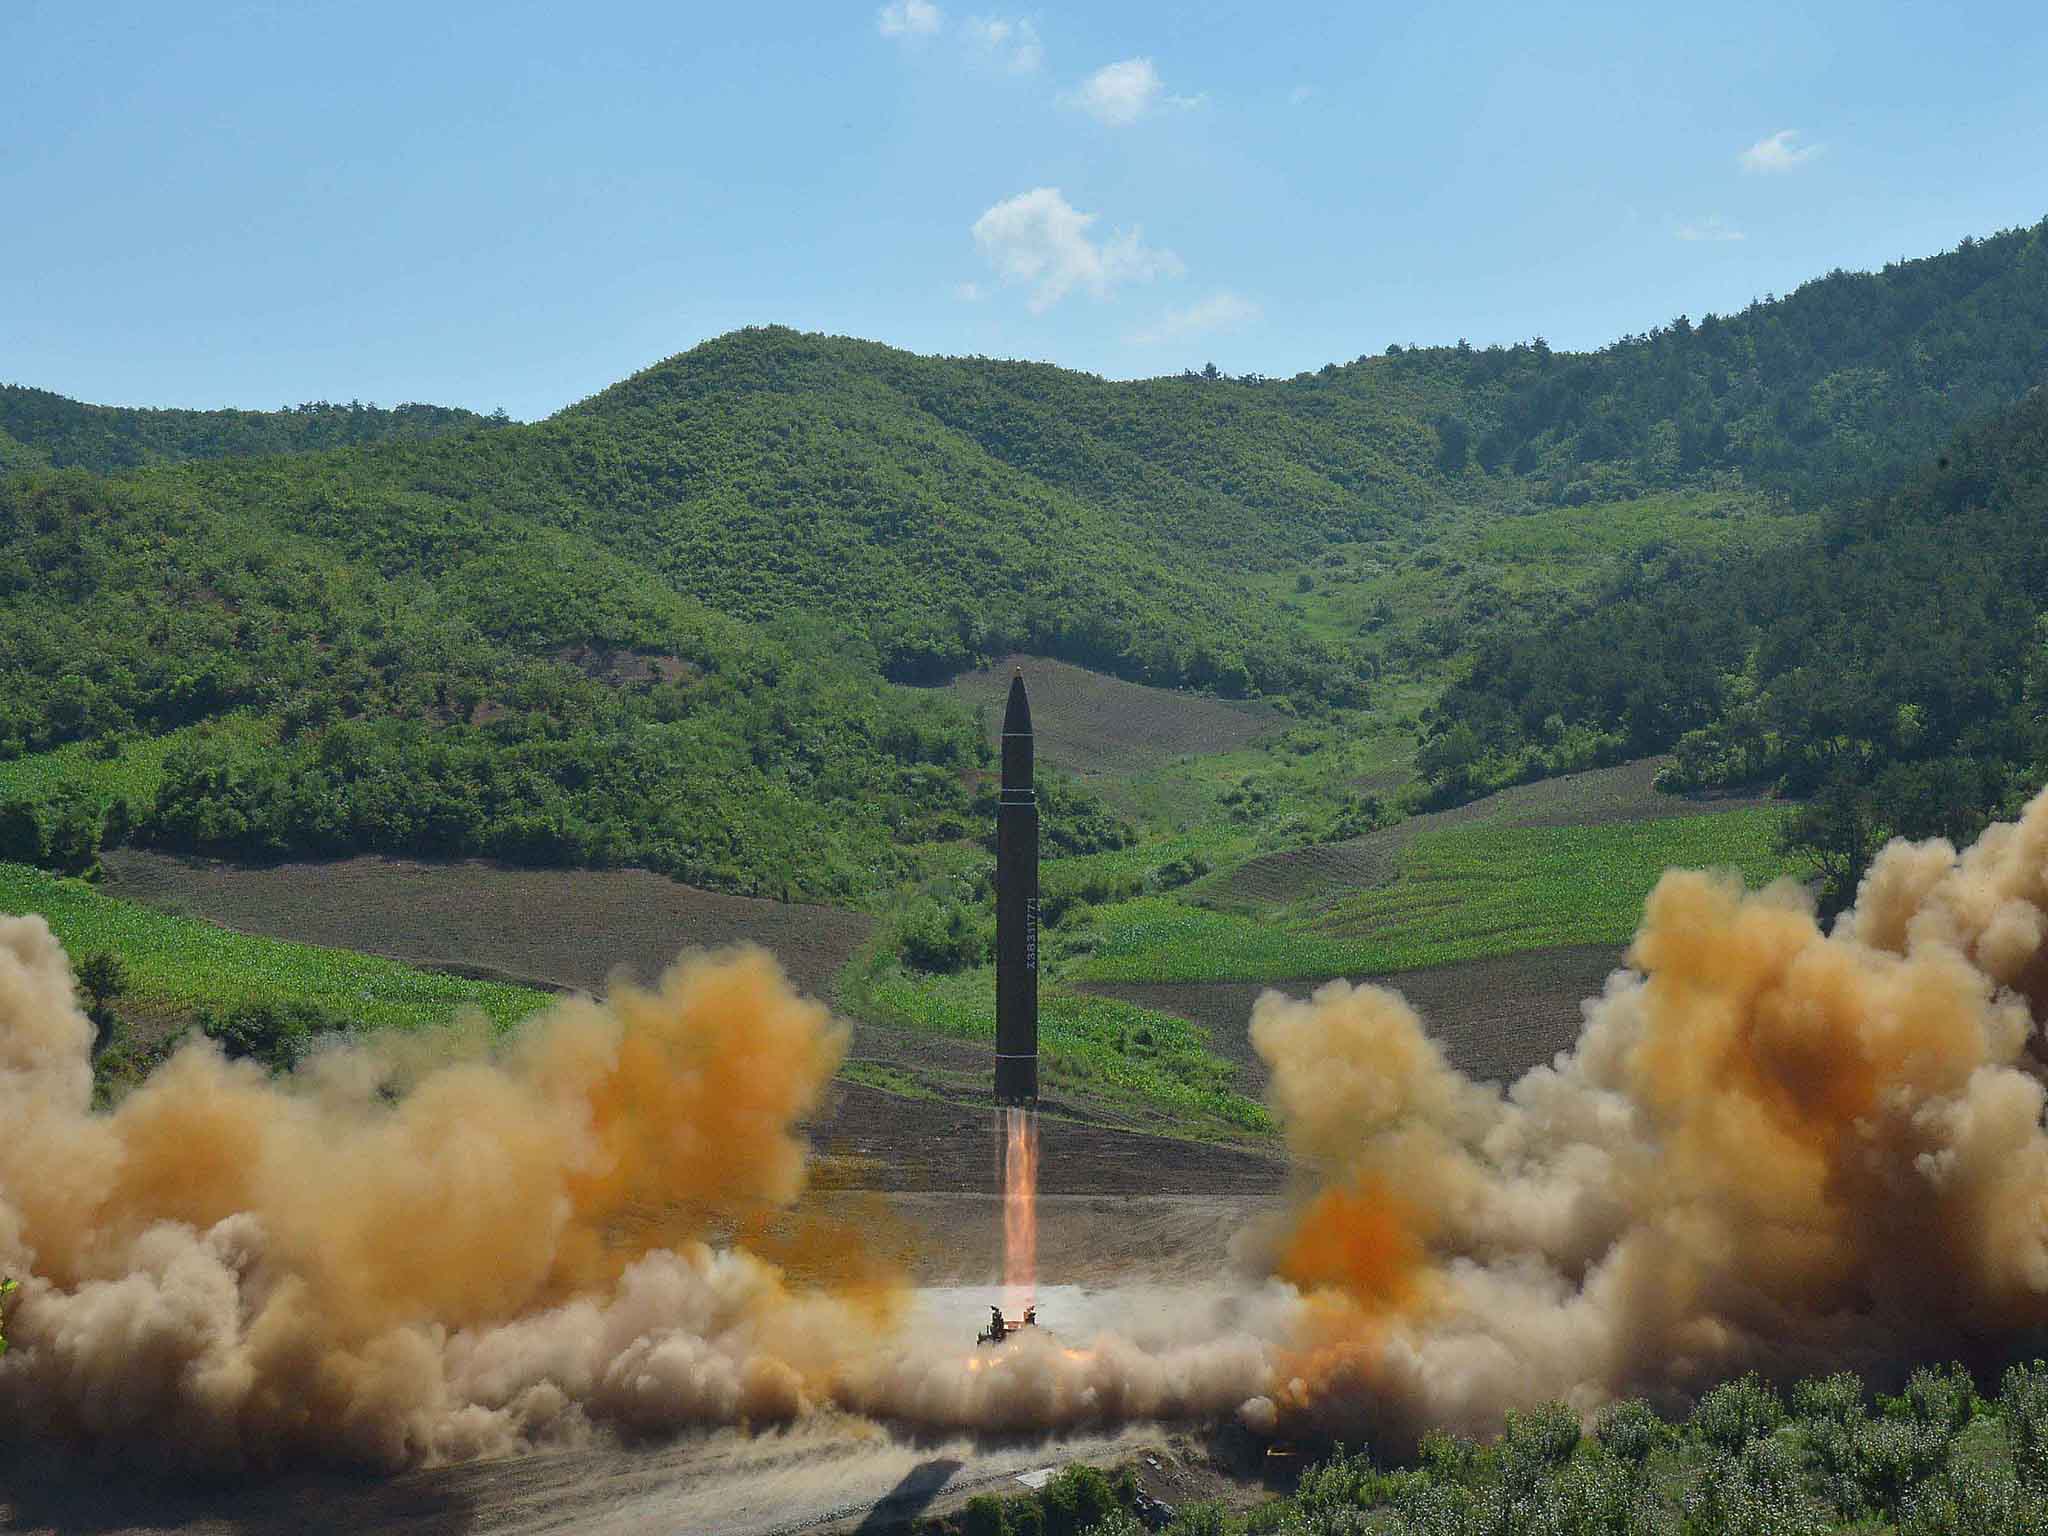 The Hwasong-14 missile being launched at an undisclosed location in North Korea